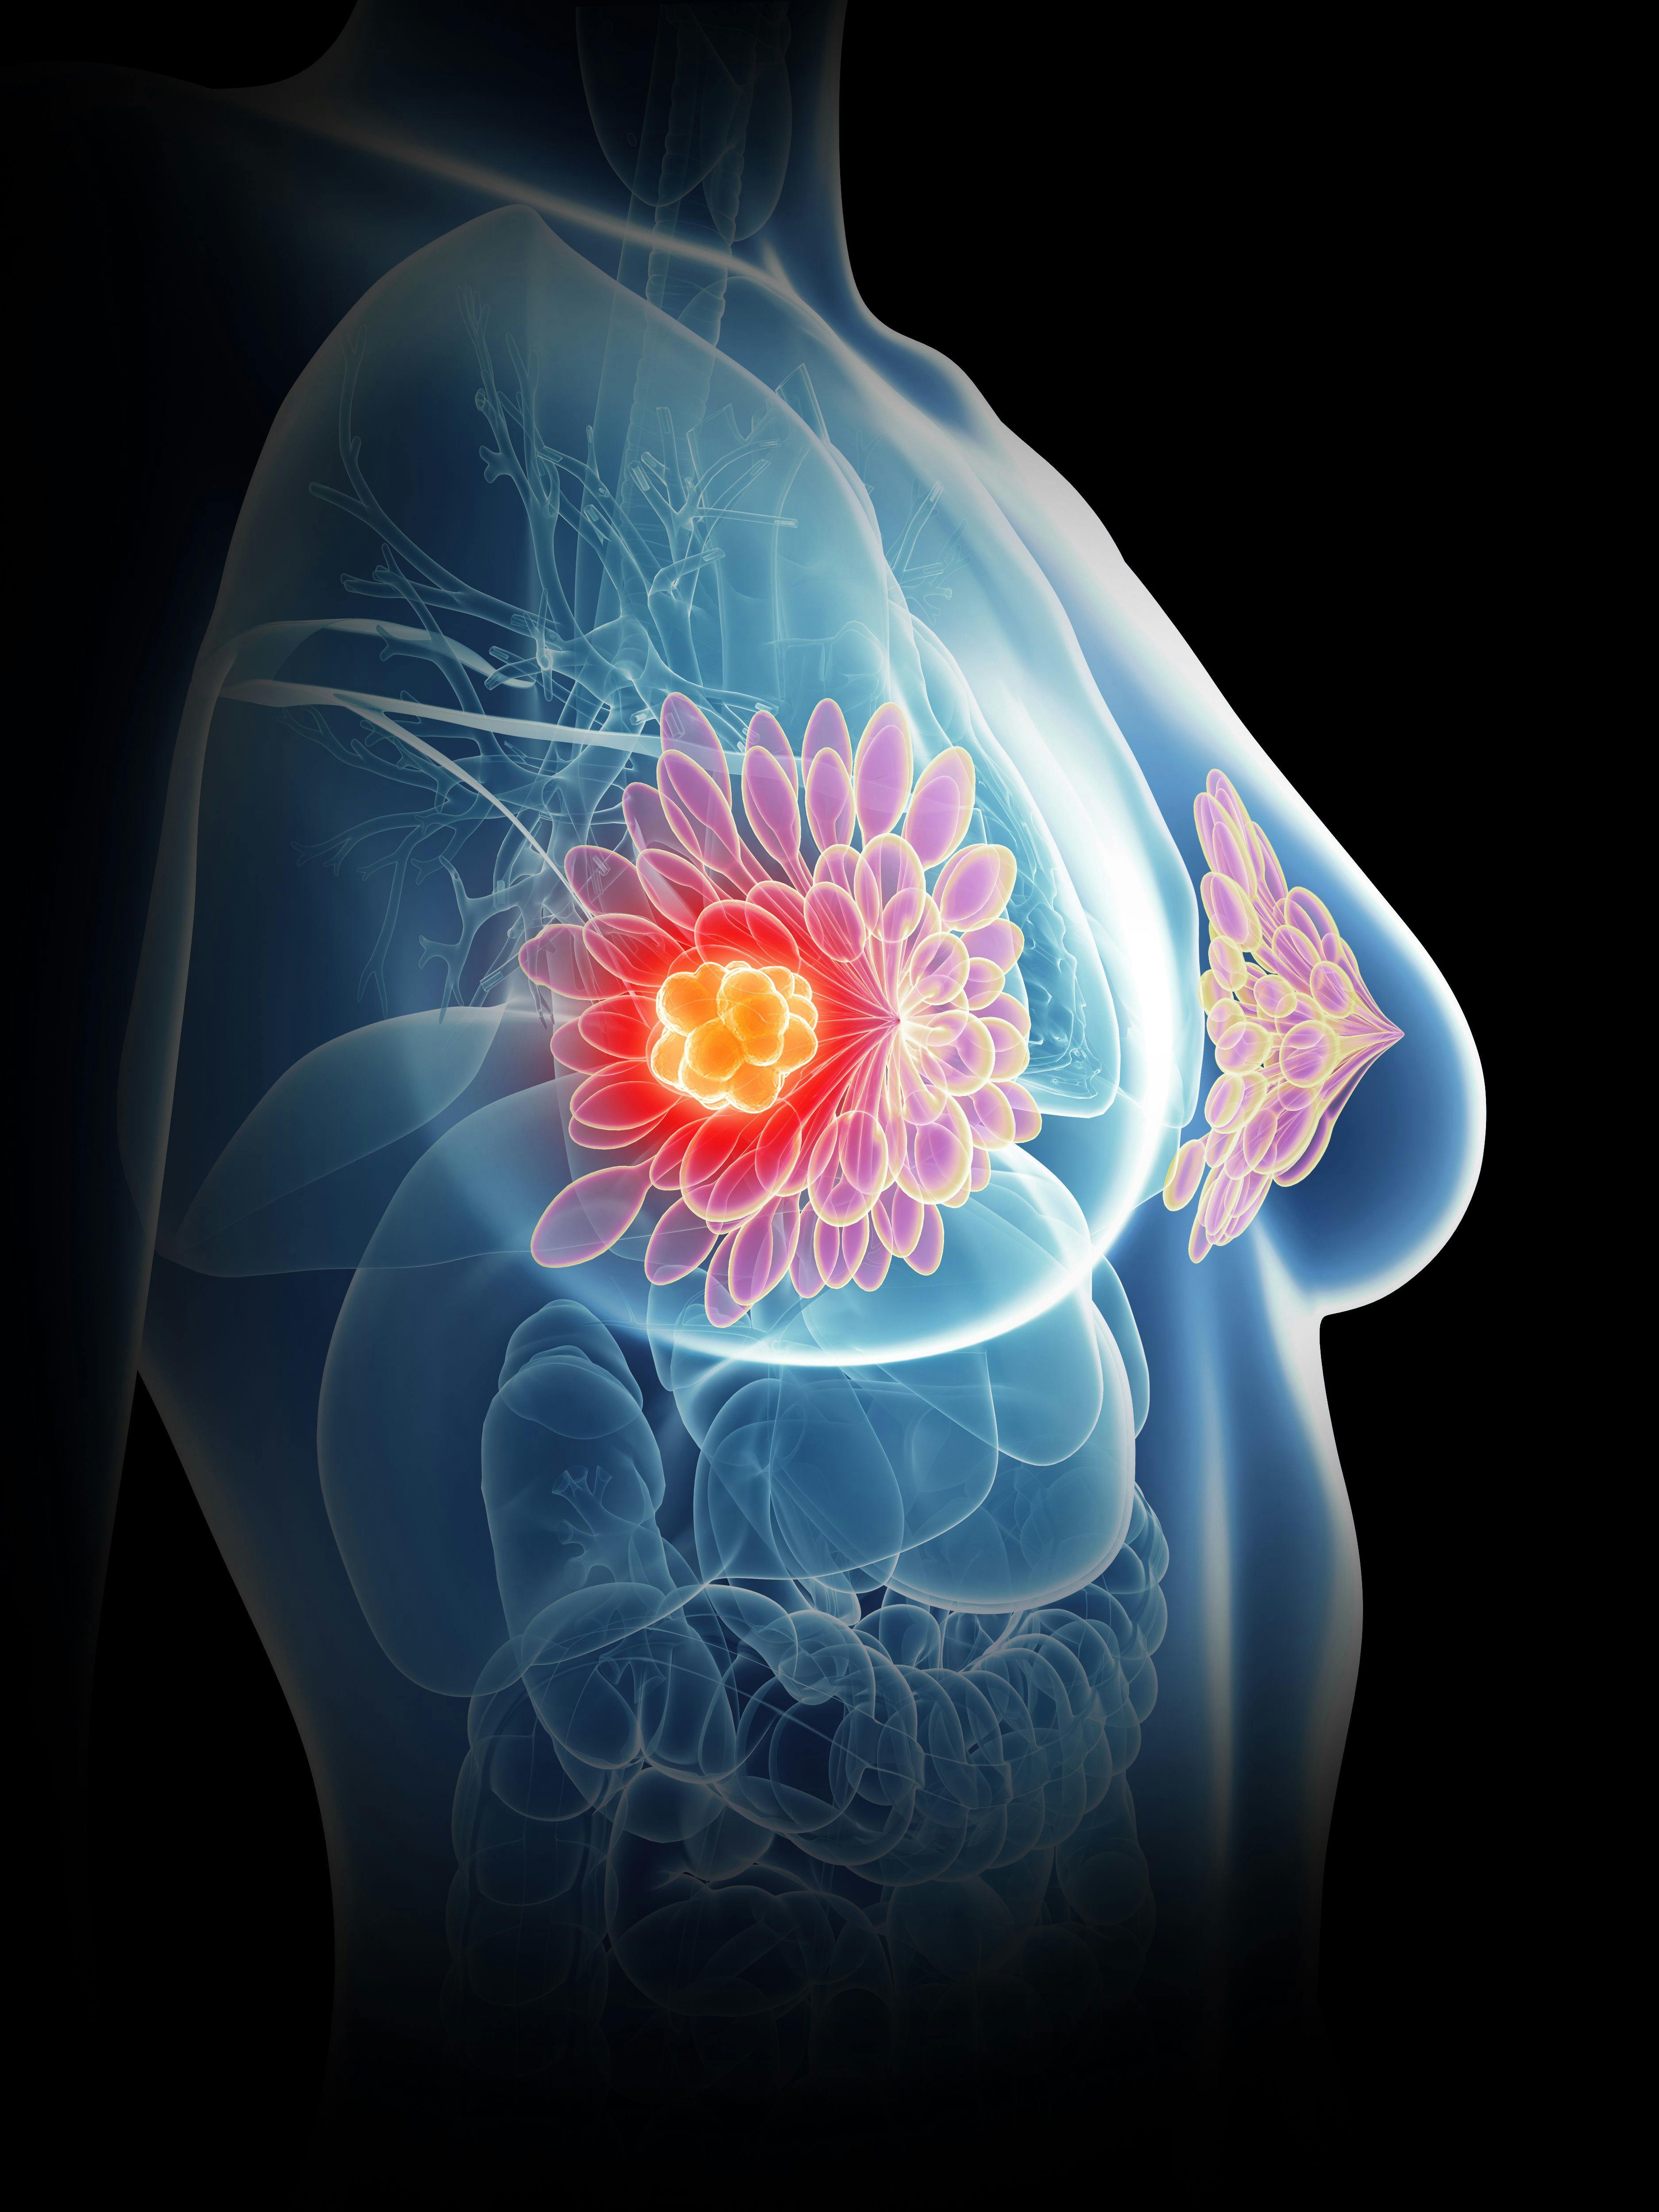 Adjuvant Olaparib Approved in European Union for BRCA1/2-Positive, HER2-Negative High-Risk Early Breast Cancer